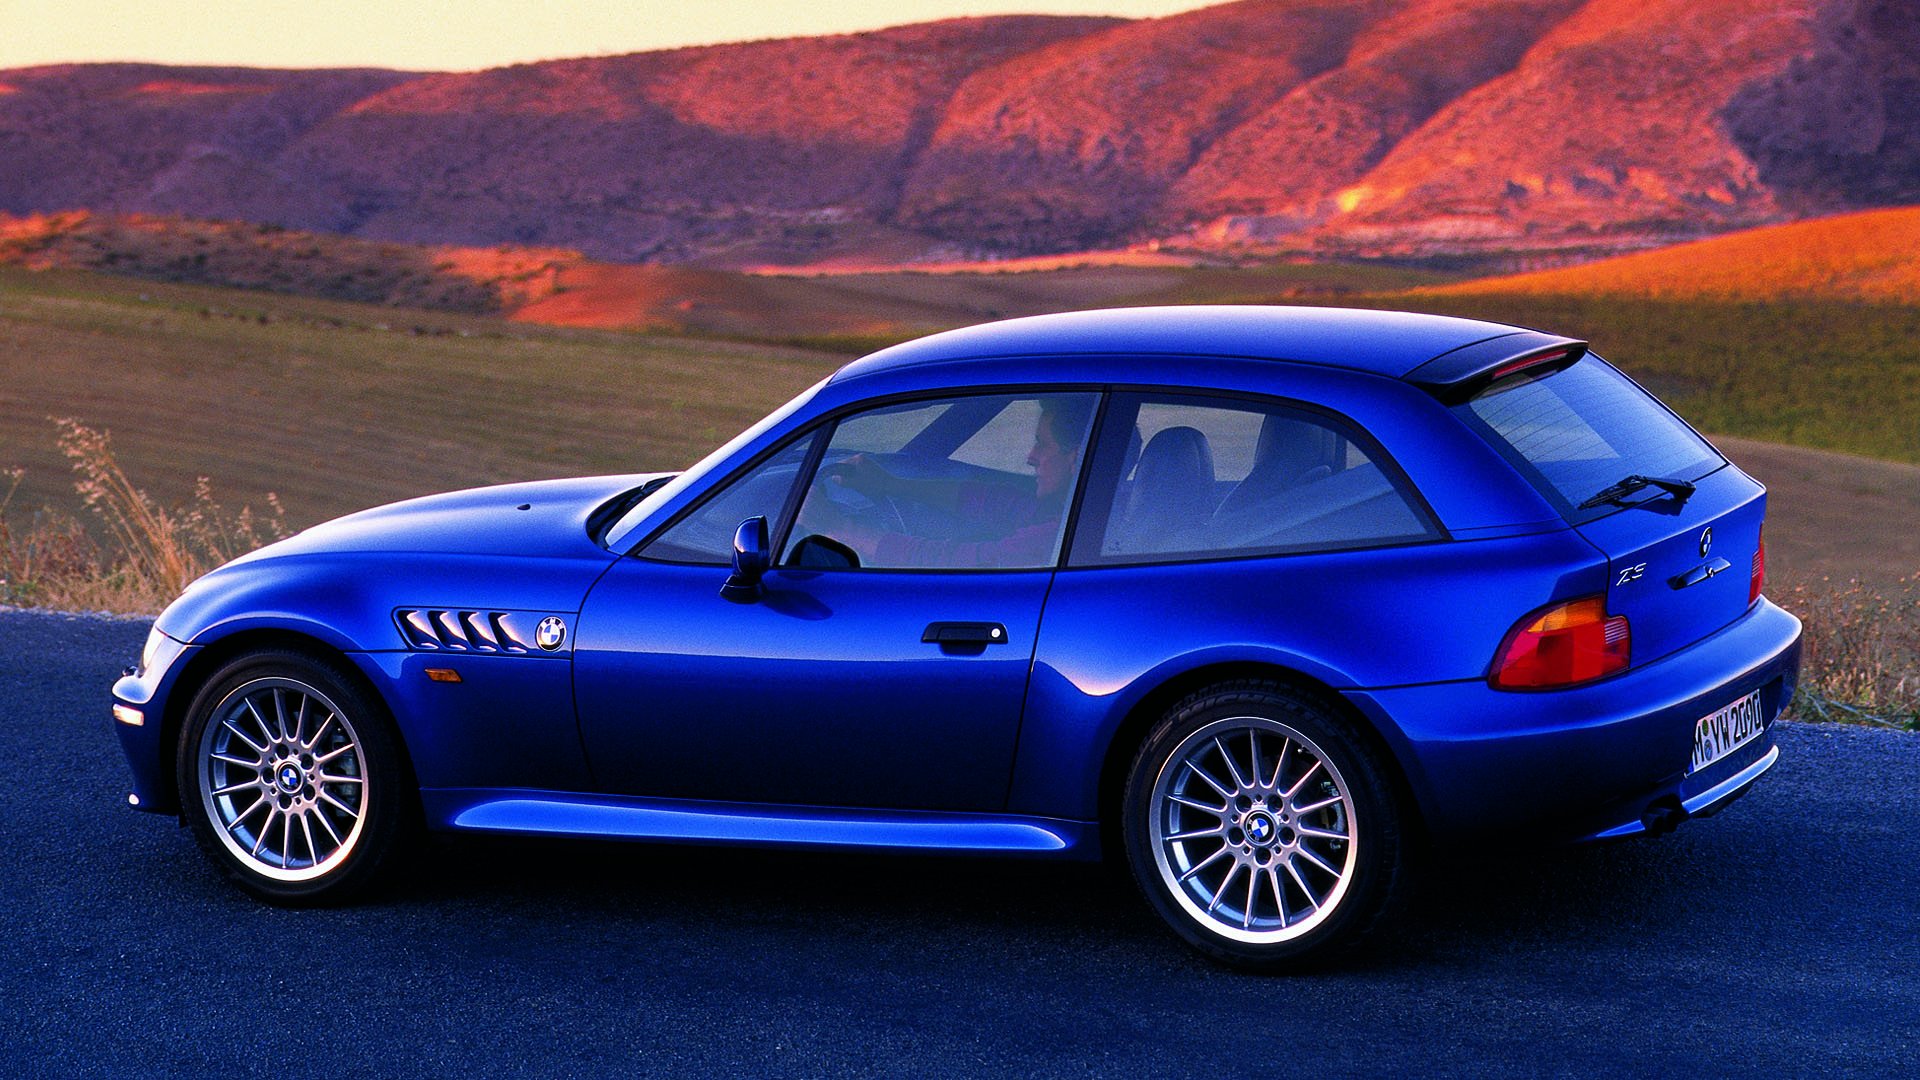 Bmw Z3 Coupe Wallpapers Top Free Bmw Z3 Coupe Backgrounds Wallpaperaccess